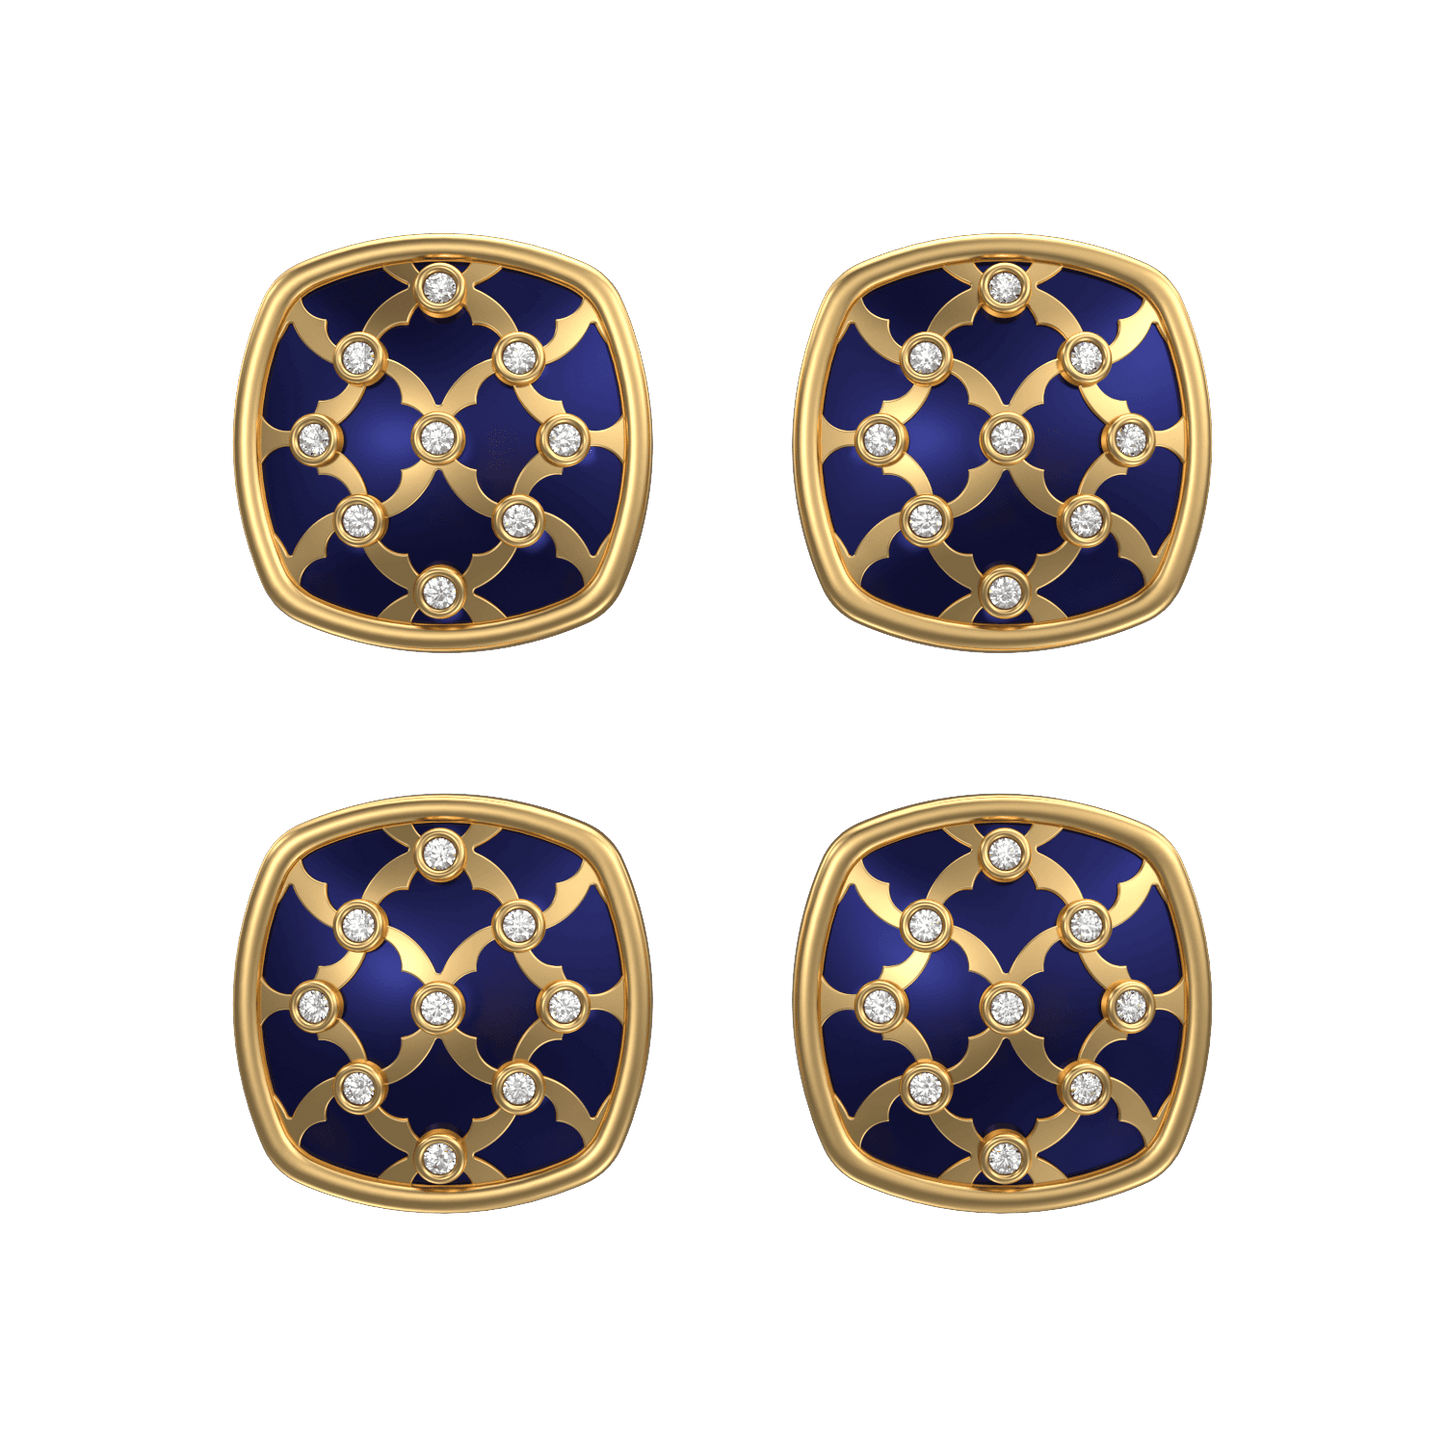 Enchanted Luxe, Classic Kurta Button Set with CZ Diamonds, 18kt Gold Plating and Enamel.